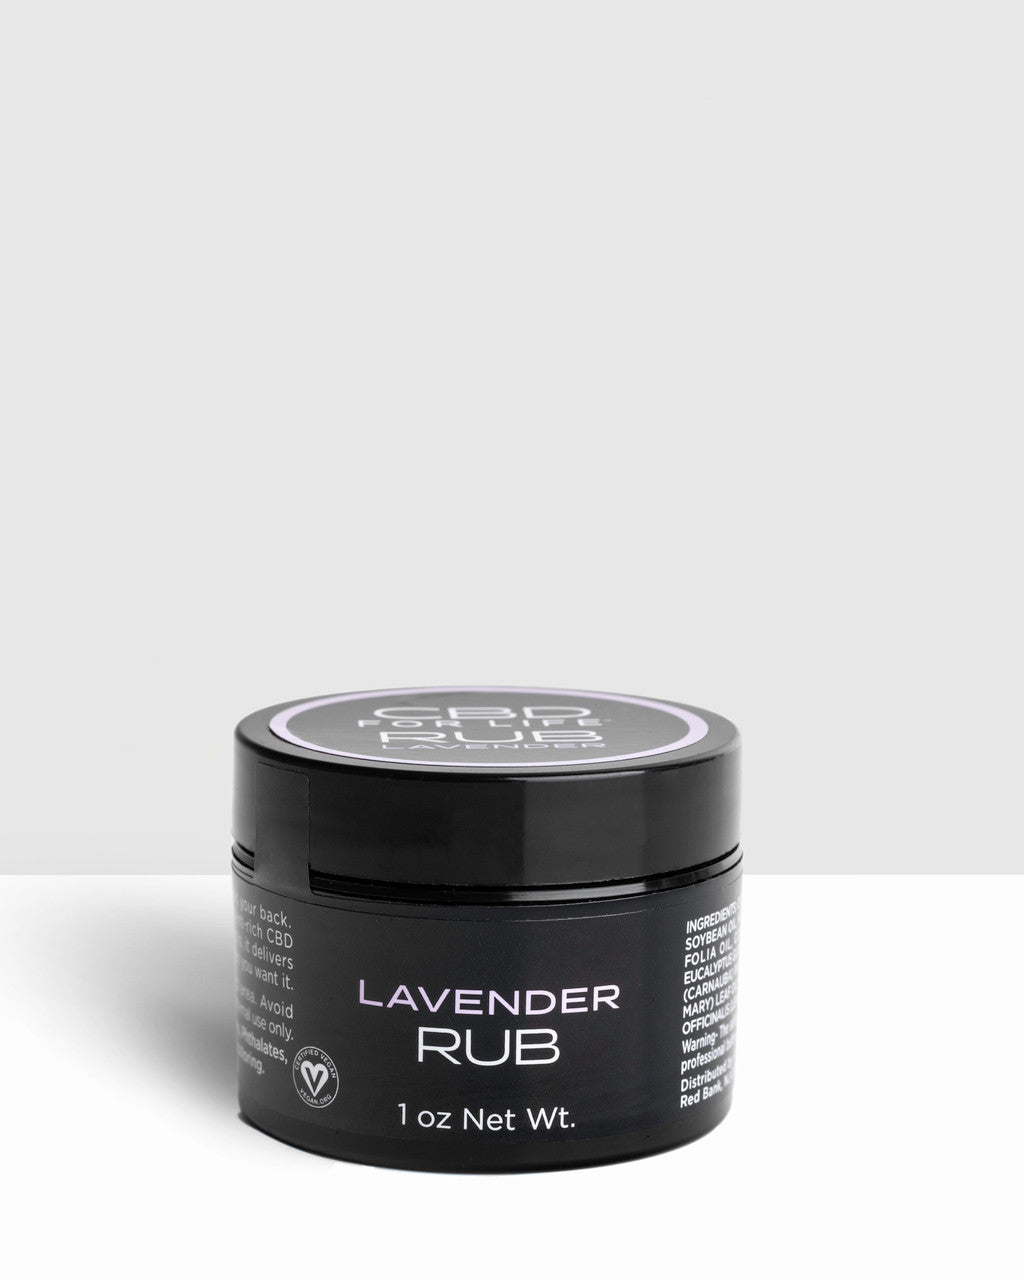 Our 100% vegan Lavender Rub is the answer for aches, pains, and migraines. This product is a powerful CBD salve and melts away tension related to sore muscles and helps with symptoms of tension headaches and migraines.